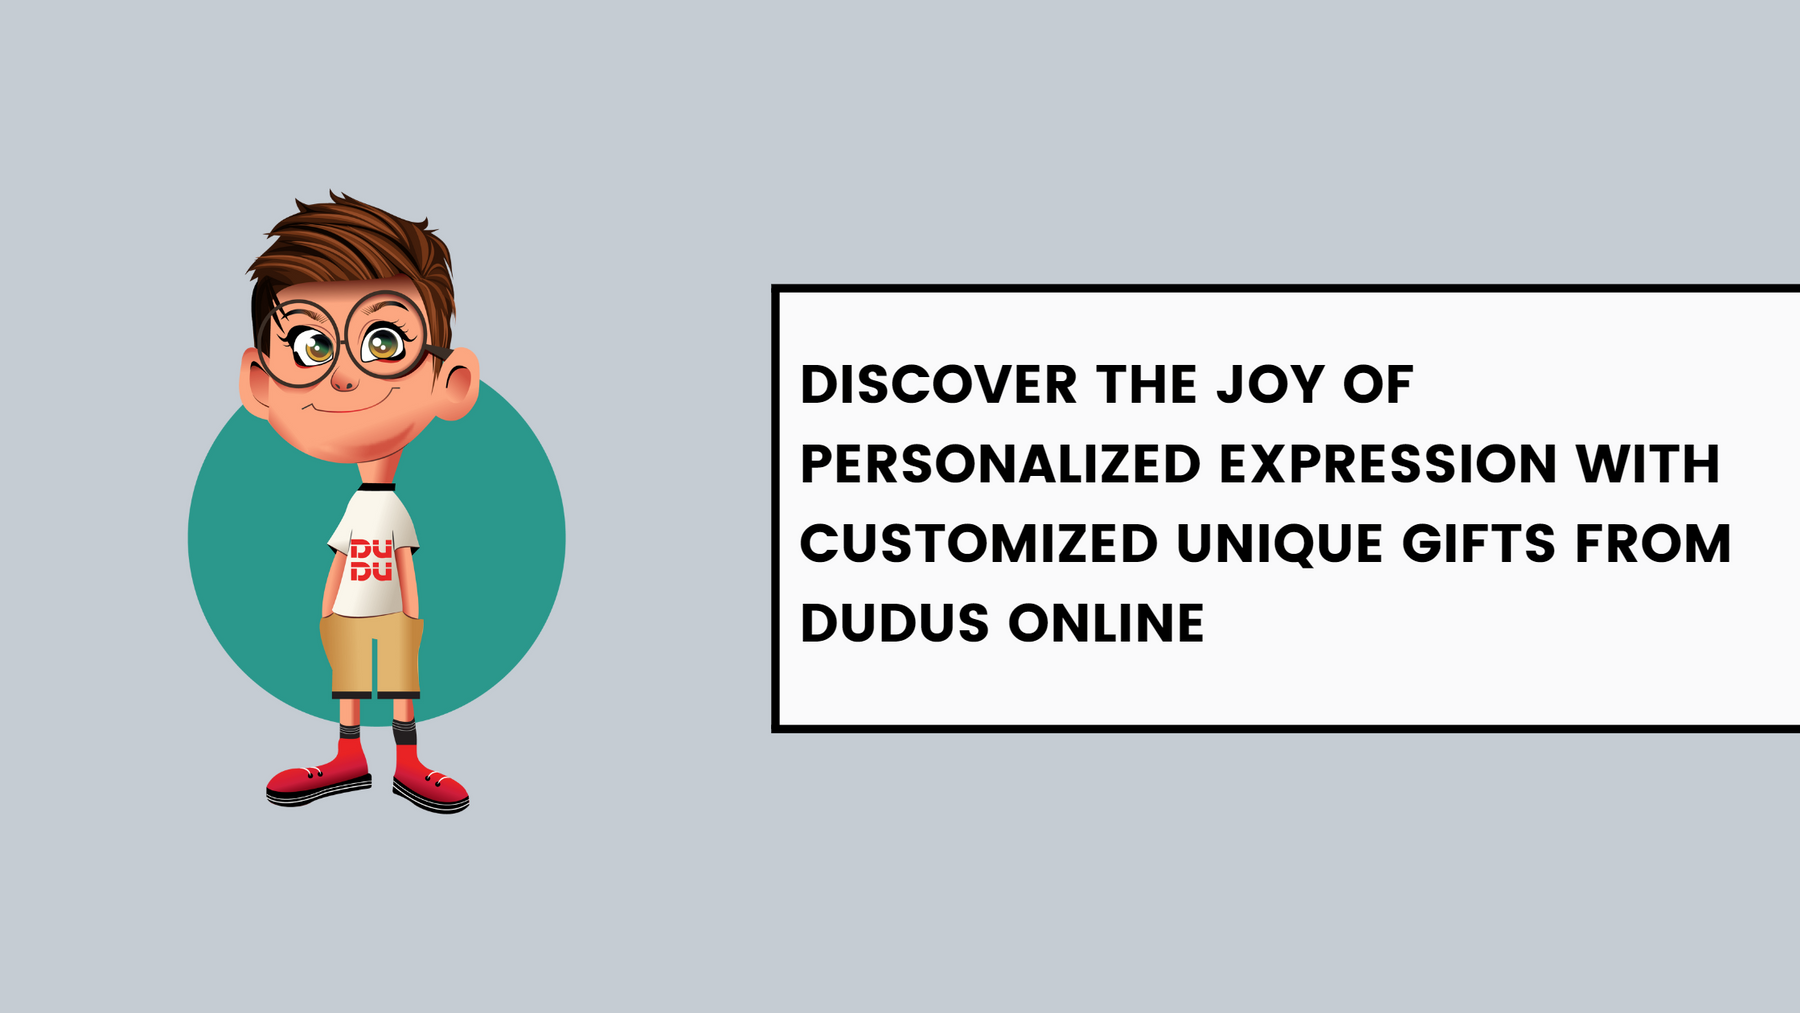 Discover the Joy of Personalized Expression with Customized Unique Gifts from Dudus Online